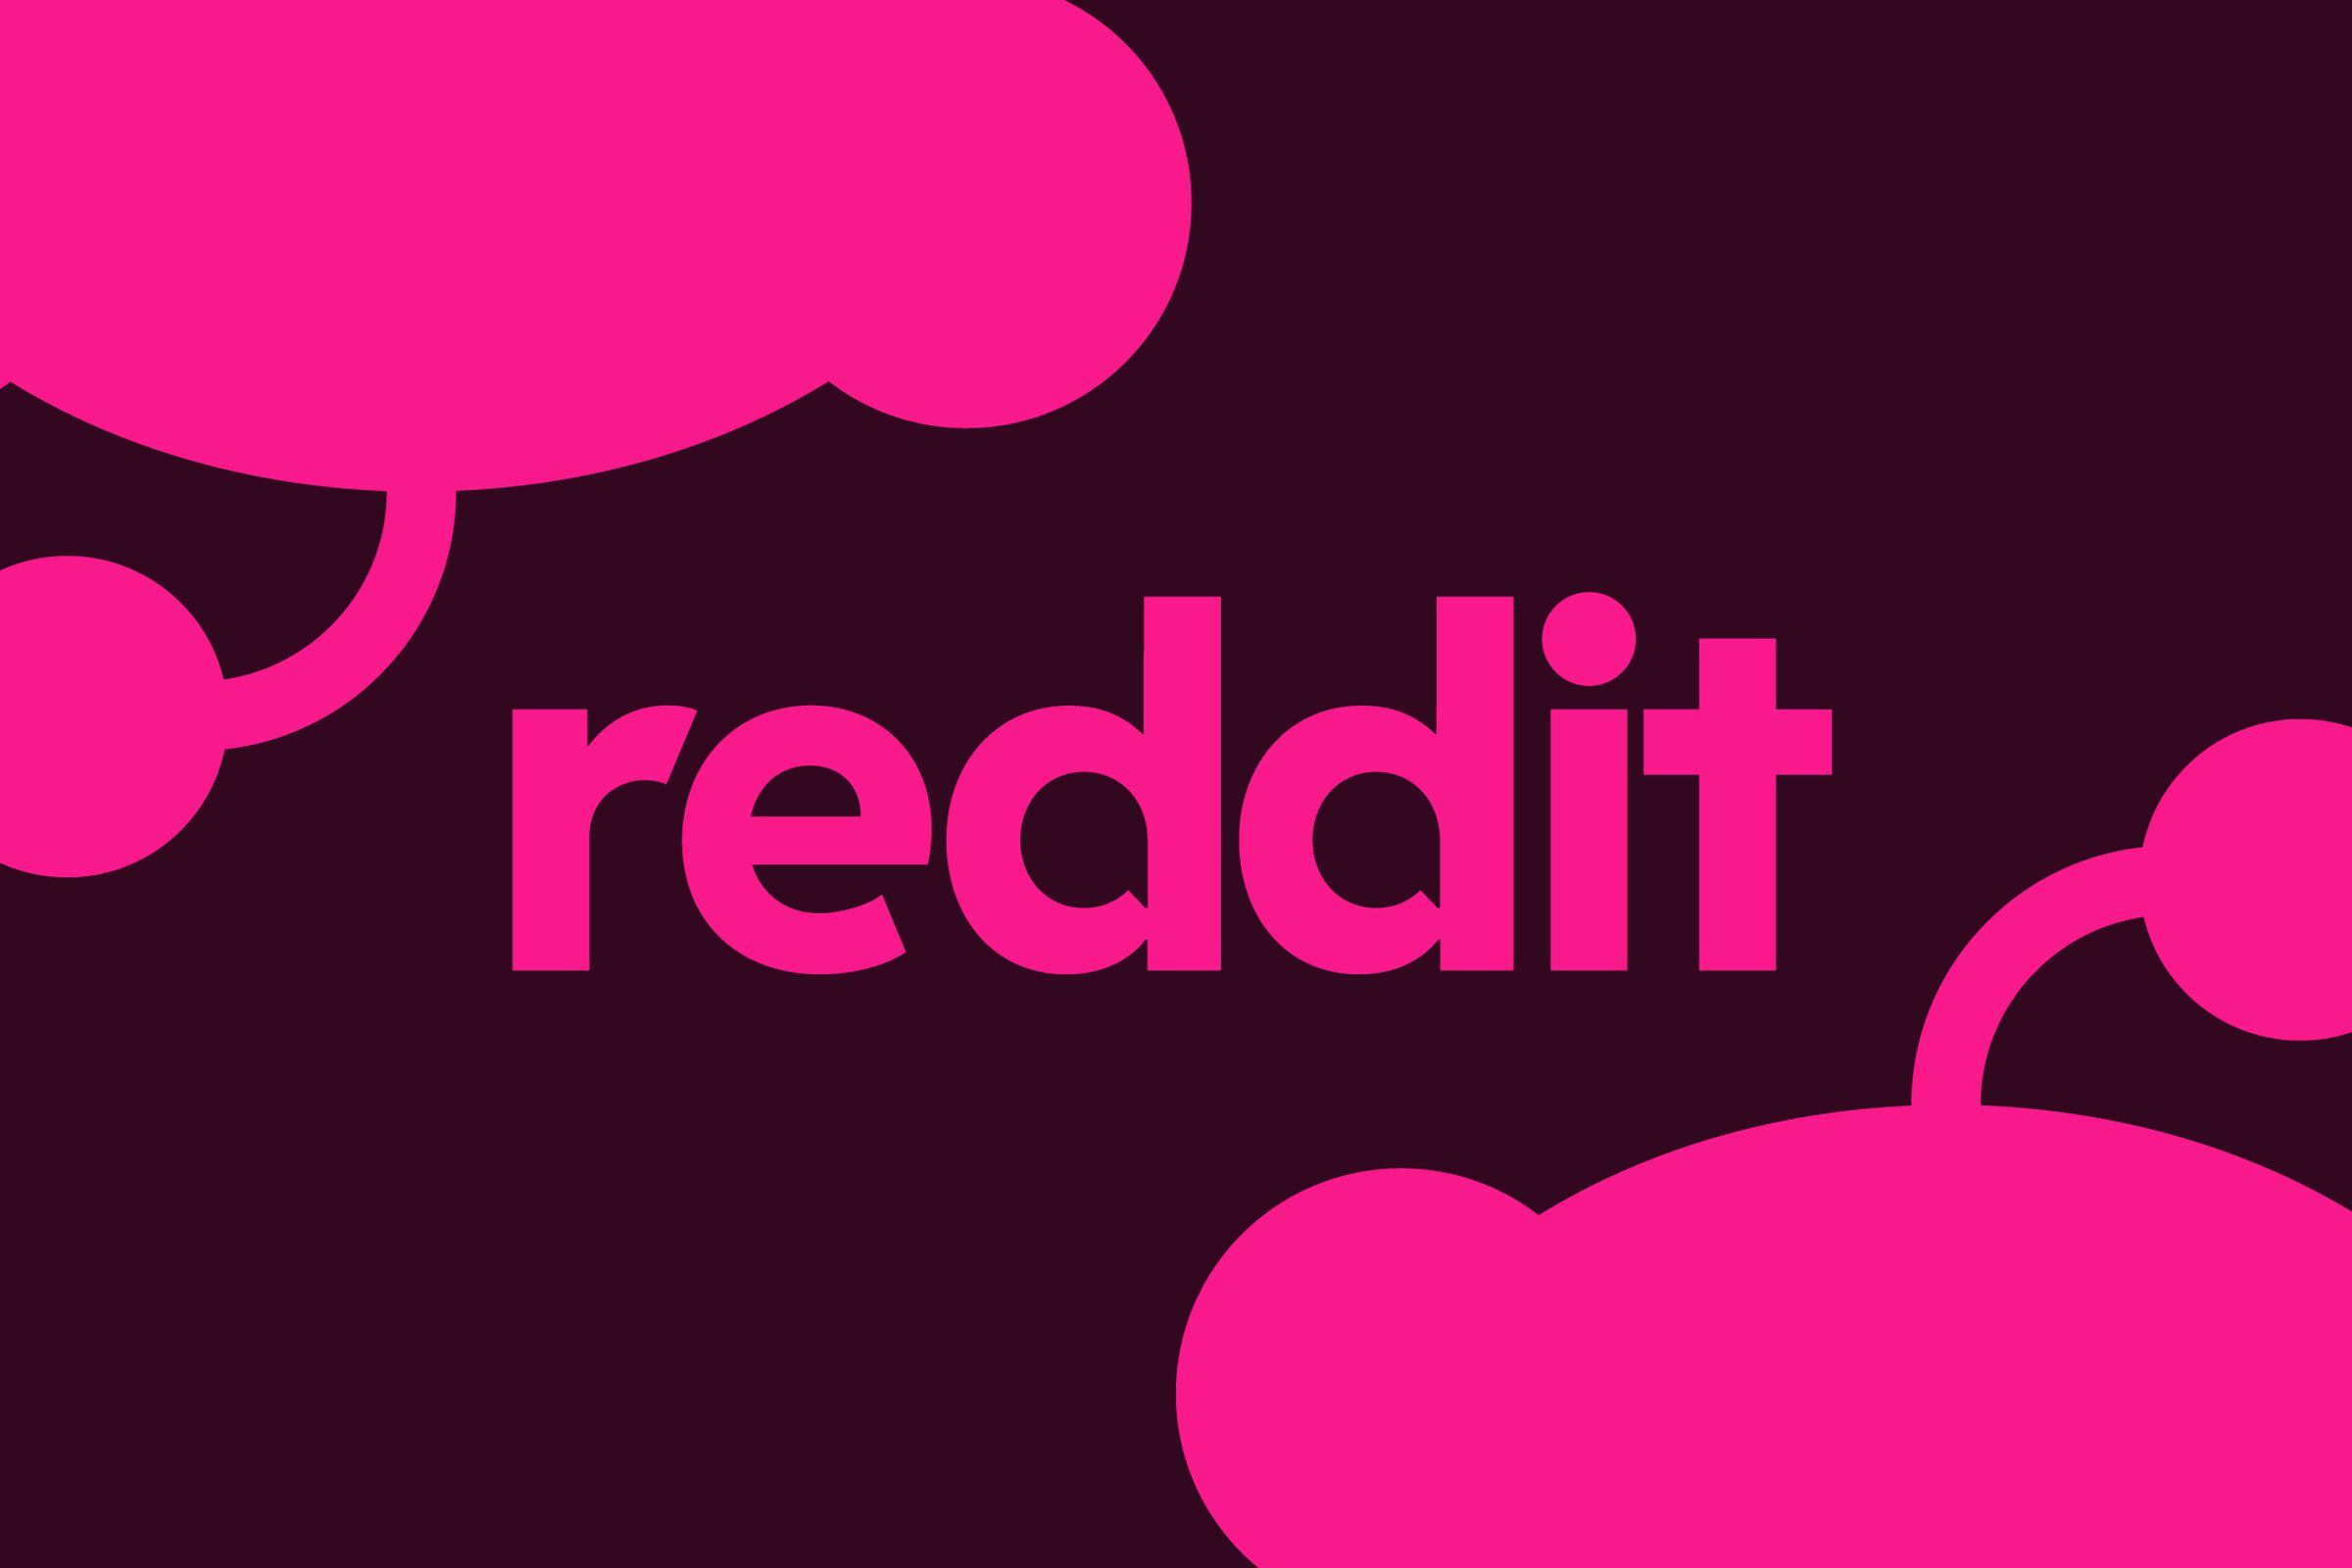 Pink text reading “reddit” with also pink portions of the Reddit alien’s head occupying the bottom right and top left corners of the image, the top one upside down, all on a black background.